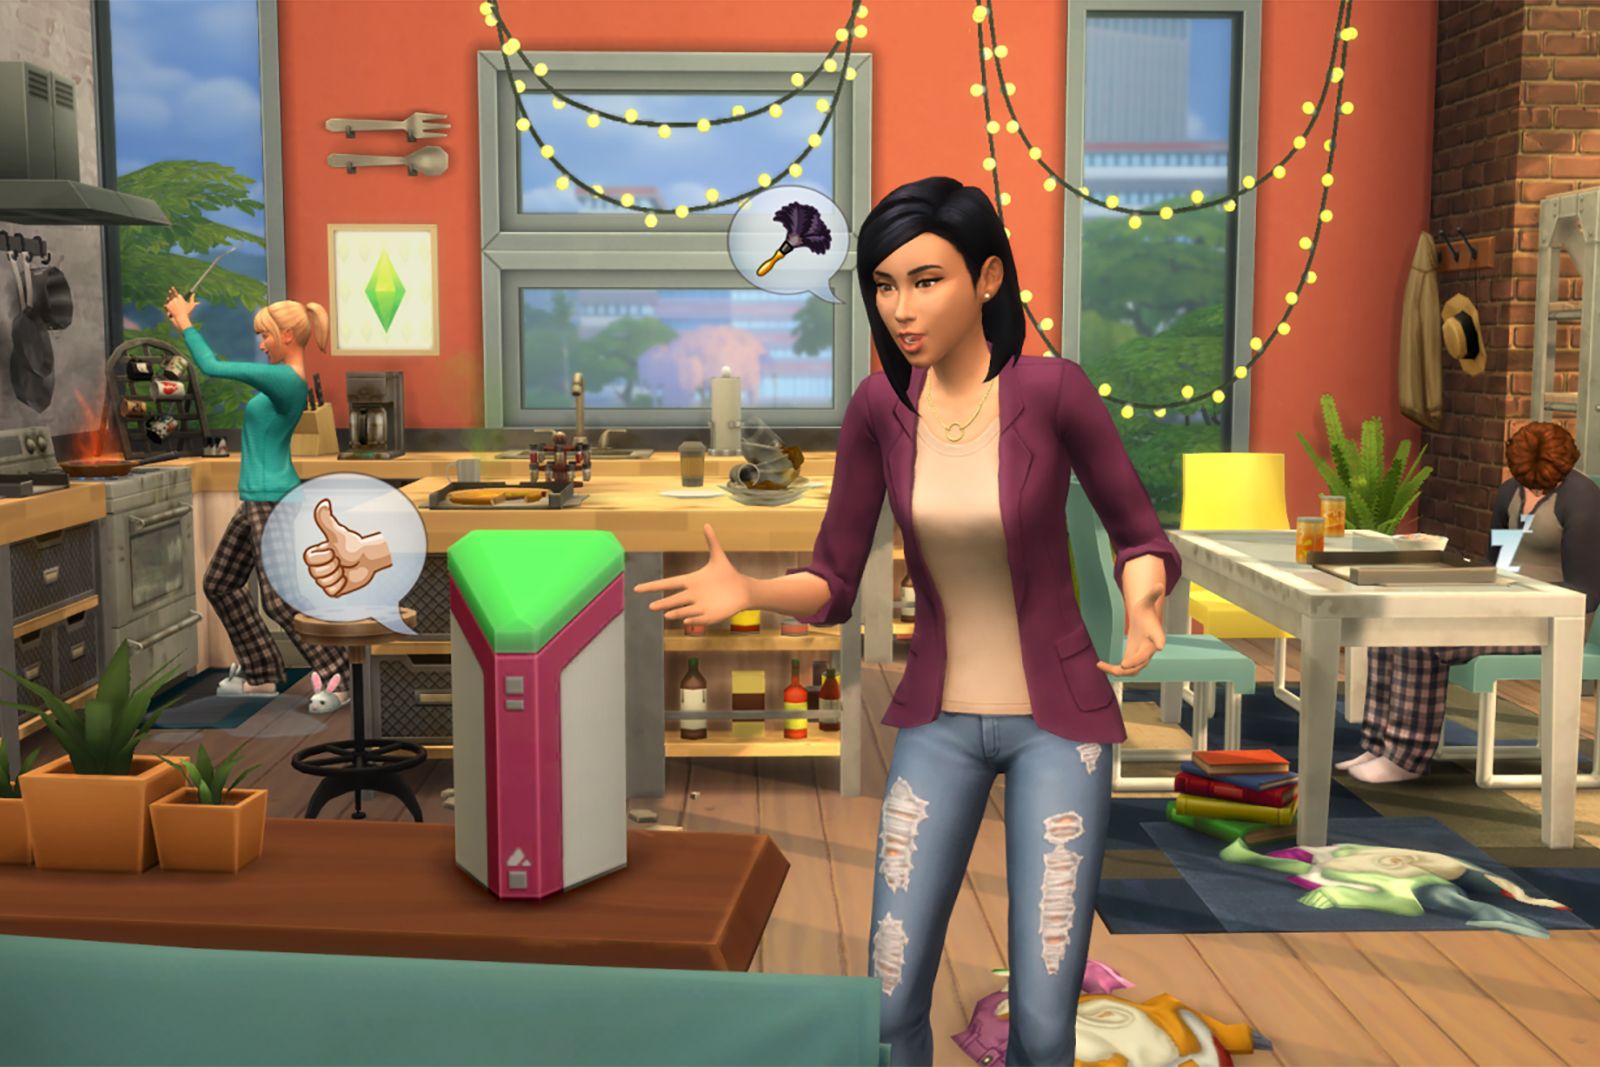 The Sims 4 gets its own Alexa skill and in-game voice assistant image 1